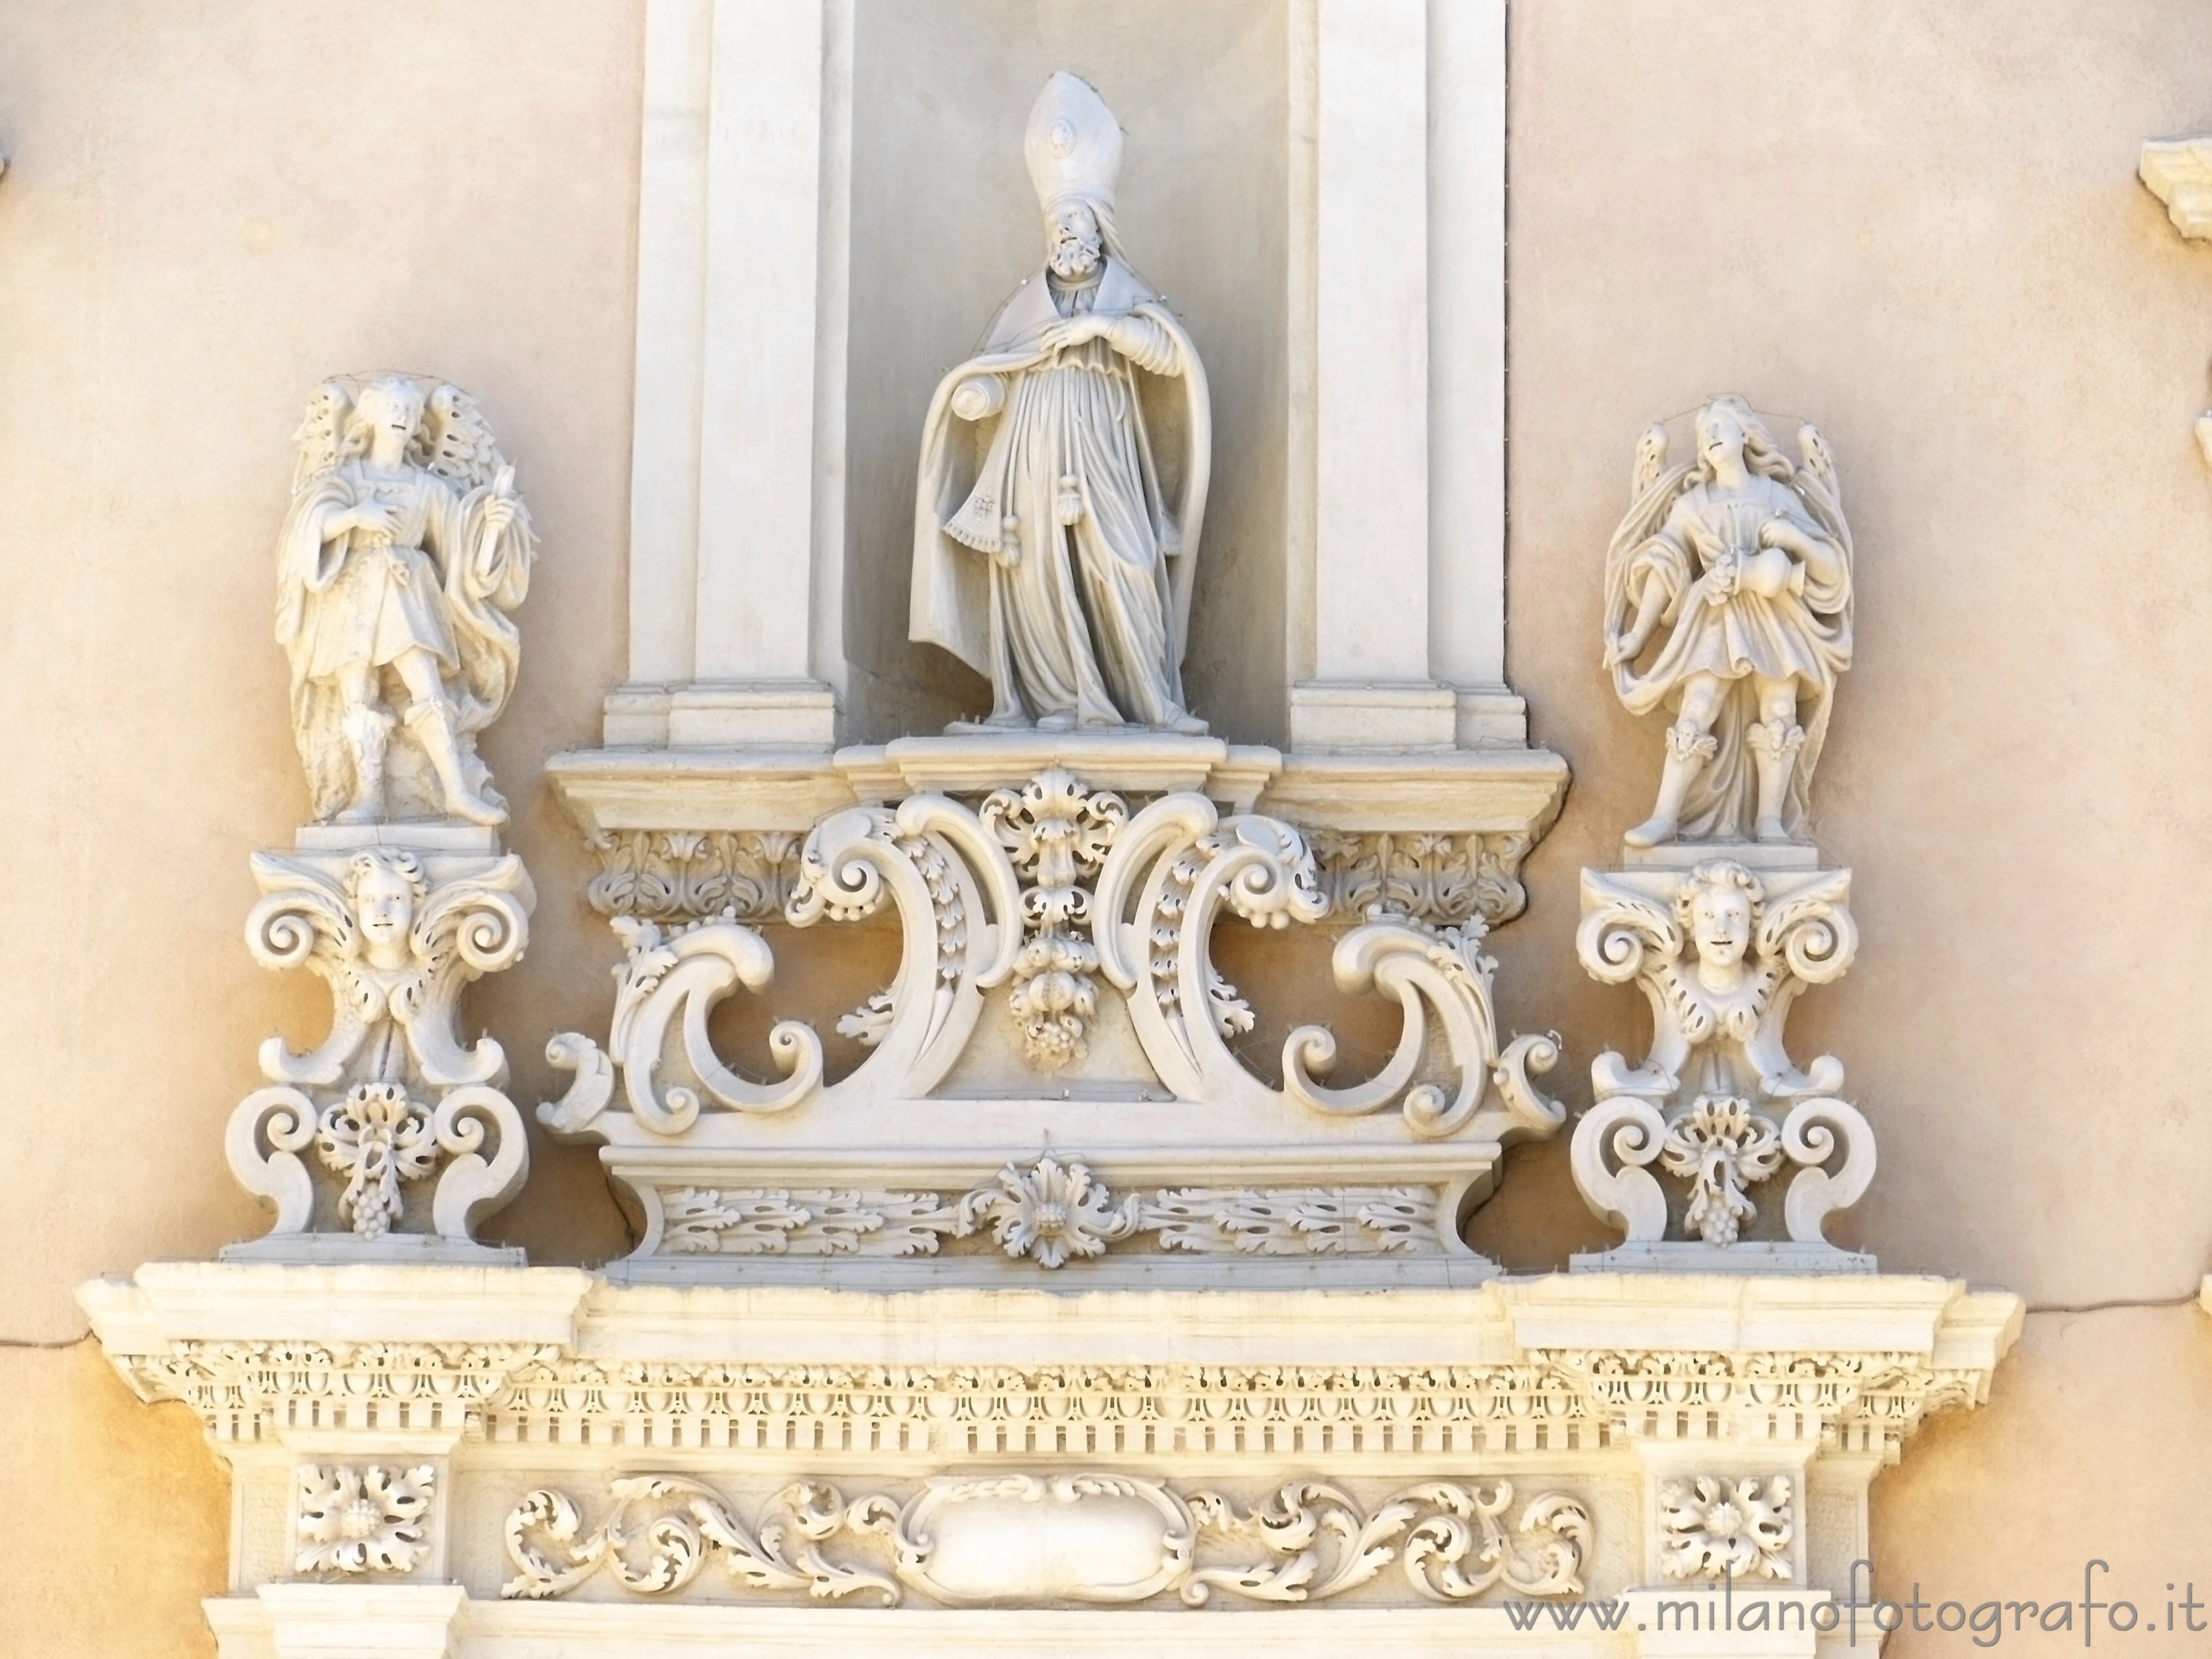 Casarano (Lecce, Italy): Decorations above the doorway of the Cathedral Church - Casarano (Lecce, Italy)